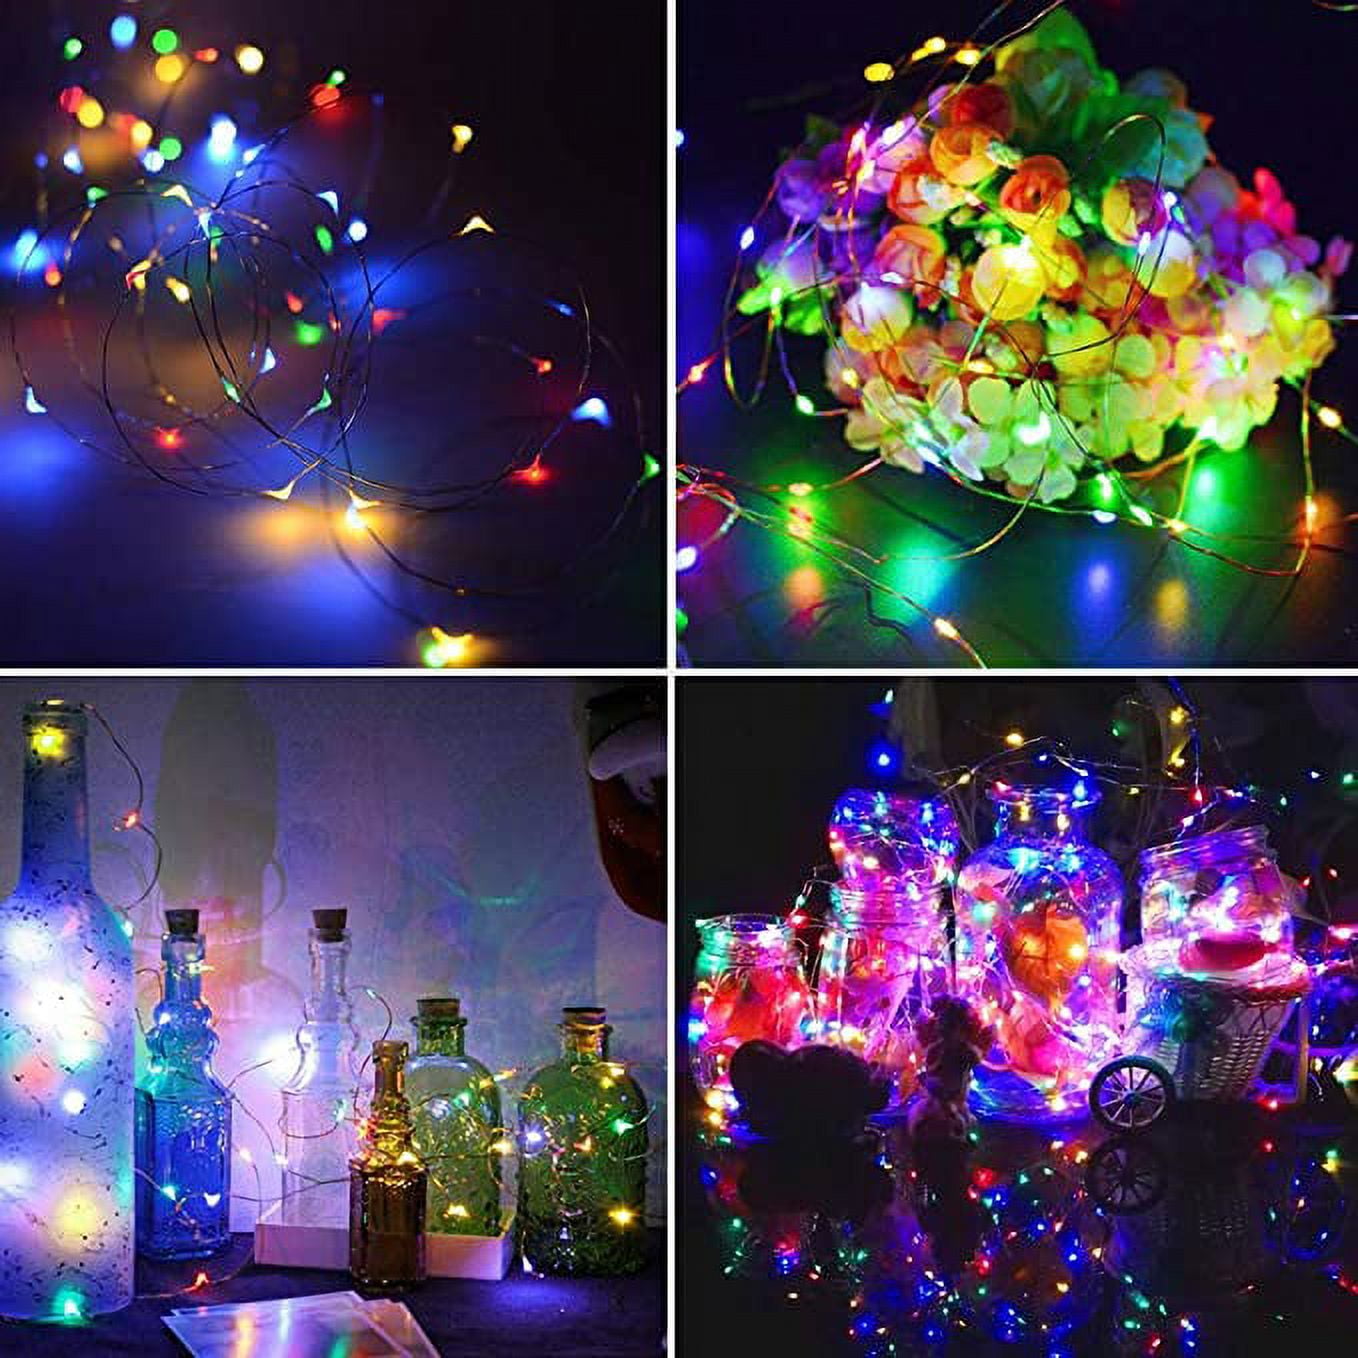 Twinkle Star 2 Set Christmas Fairy Lights Battery Operated, 33ft 100 Led  String Lights Remote Contro…See more Twinkle Star 2 Set Christmas Fairy